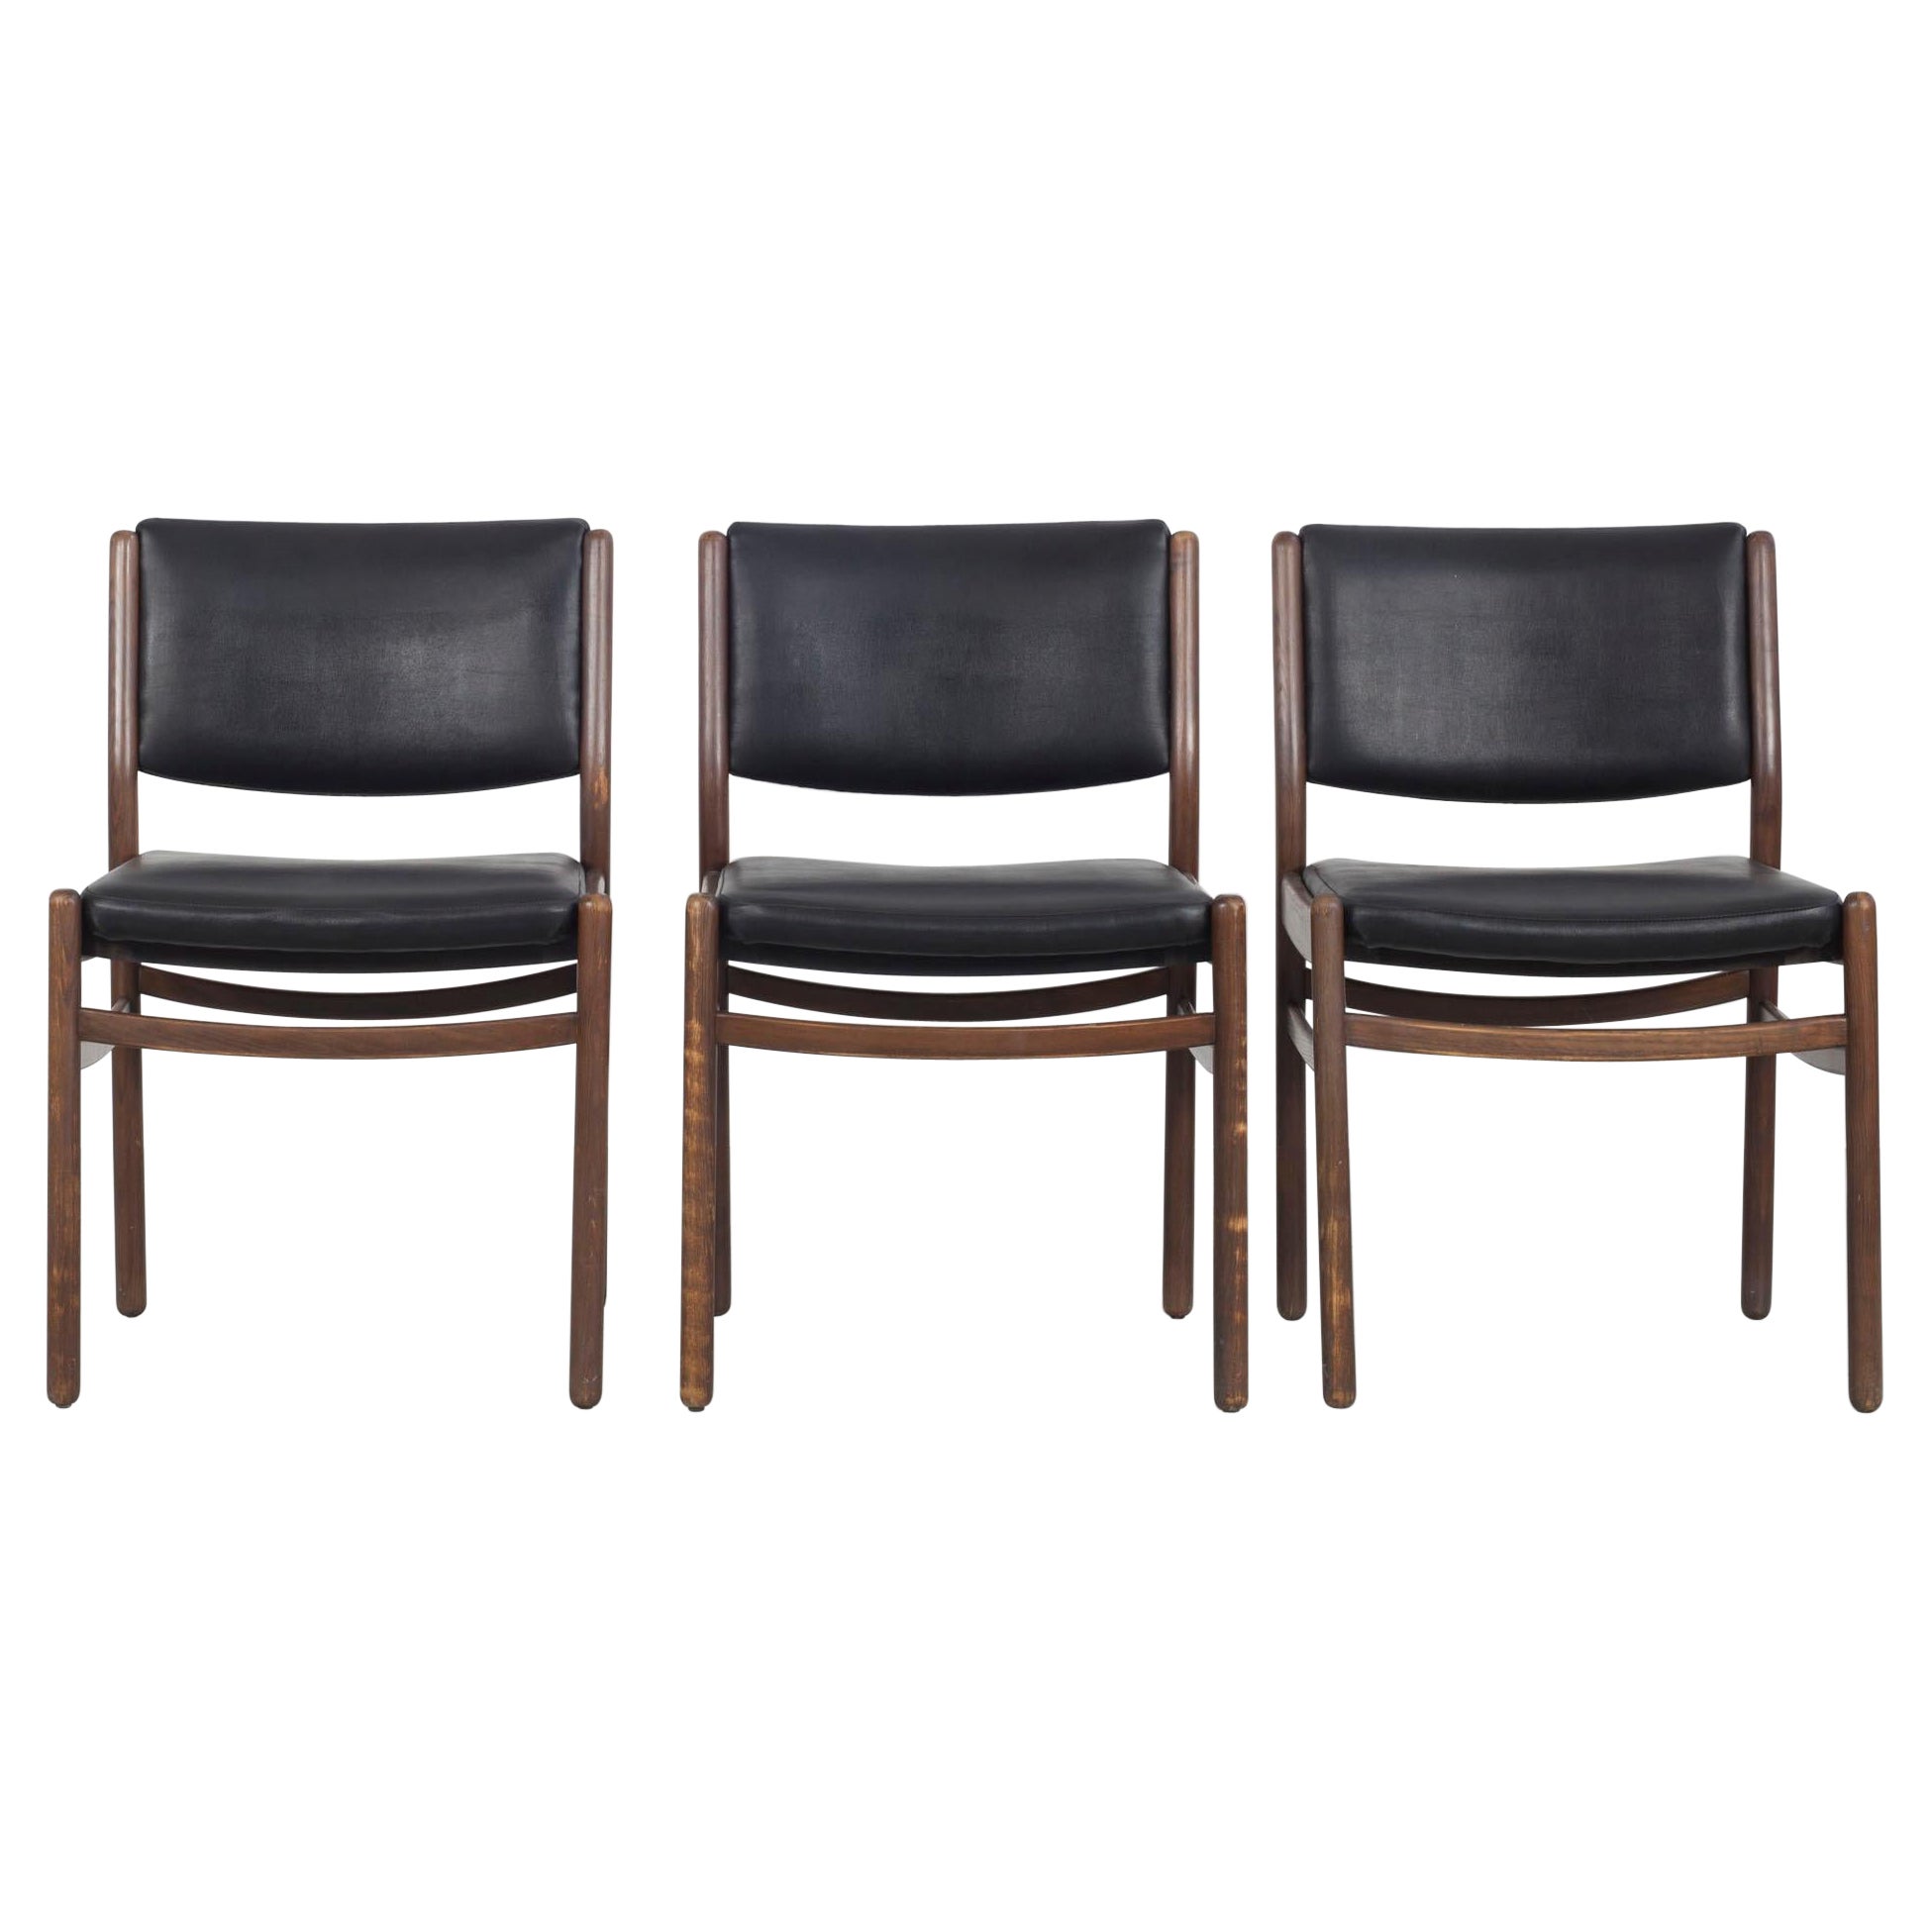 Set of Three Wooden Chairs with Black Leatherette Upholstery, Italy 60s